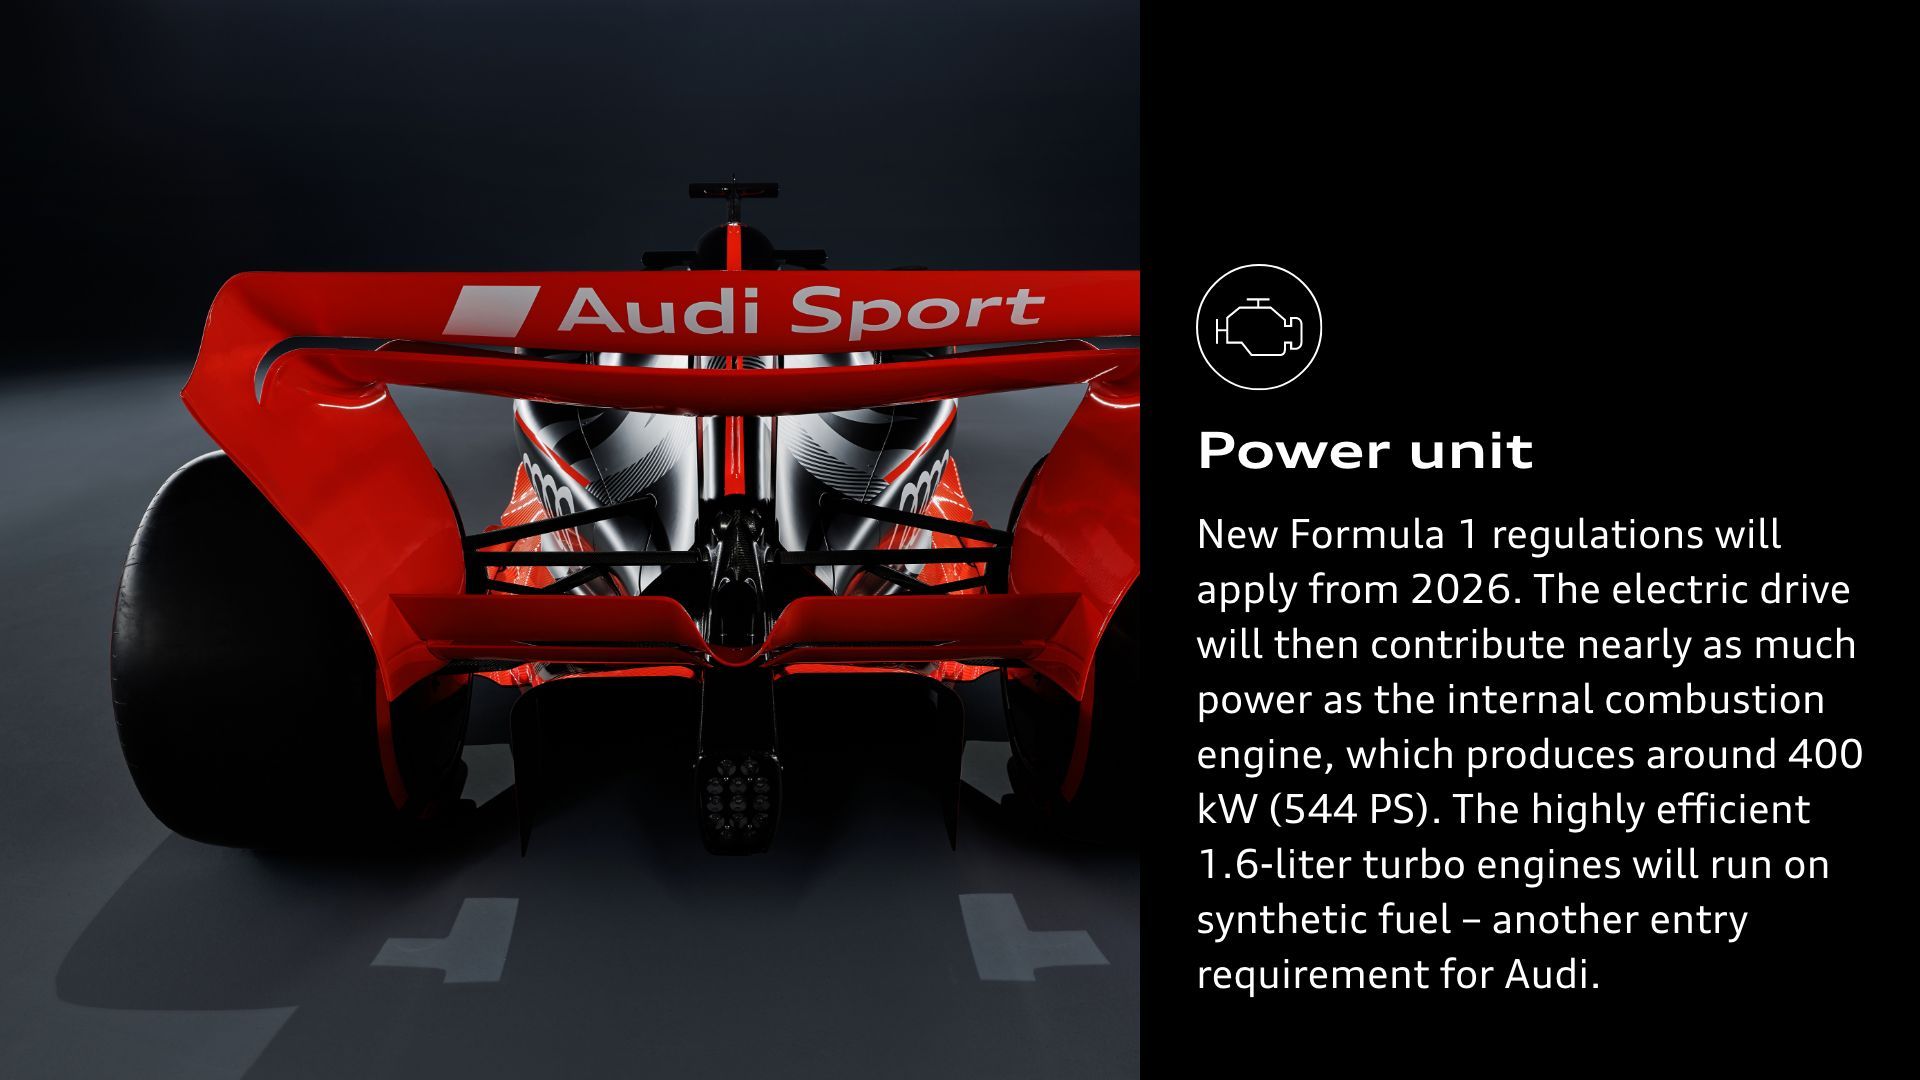 Power unit: New Formula 1 regulations will apply from 2026. The electric drive will then contribute nearly as much power as the internal combustion engine, which produces around 400 kW (544 PS). The highly efficient 1.6-liter turbo engines will run on synthetic fuel – another entry requirement for Audi.